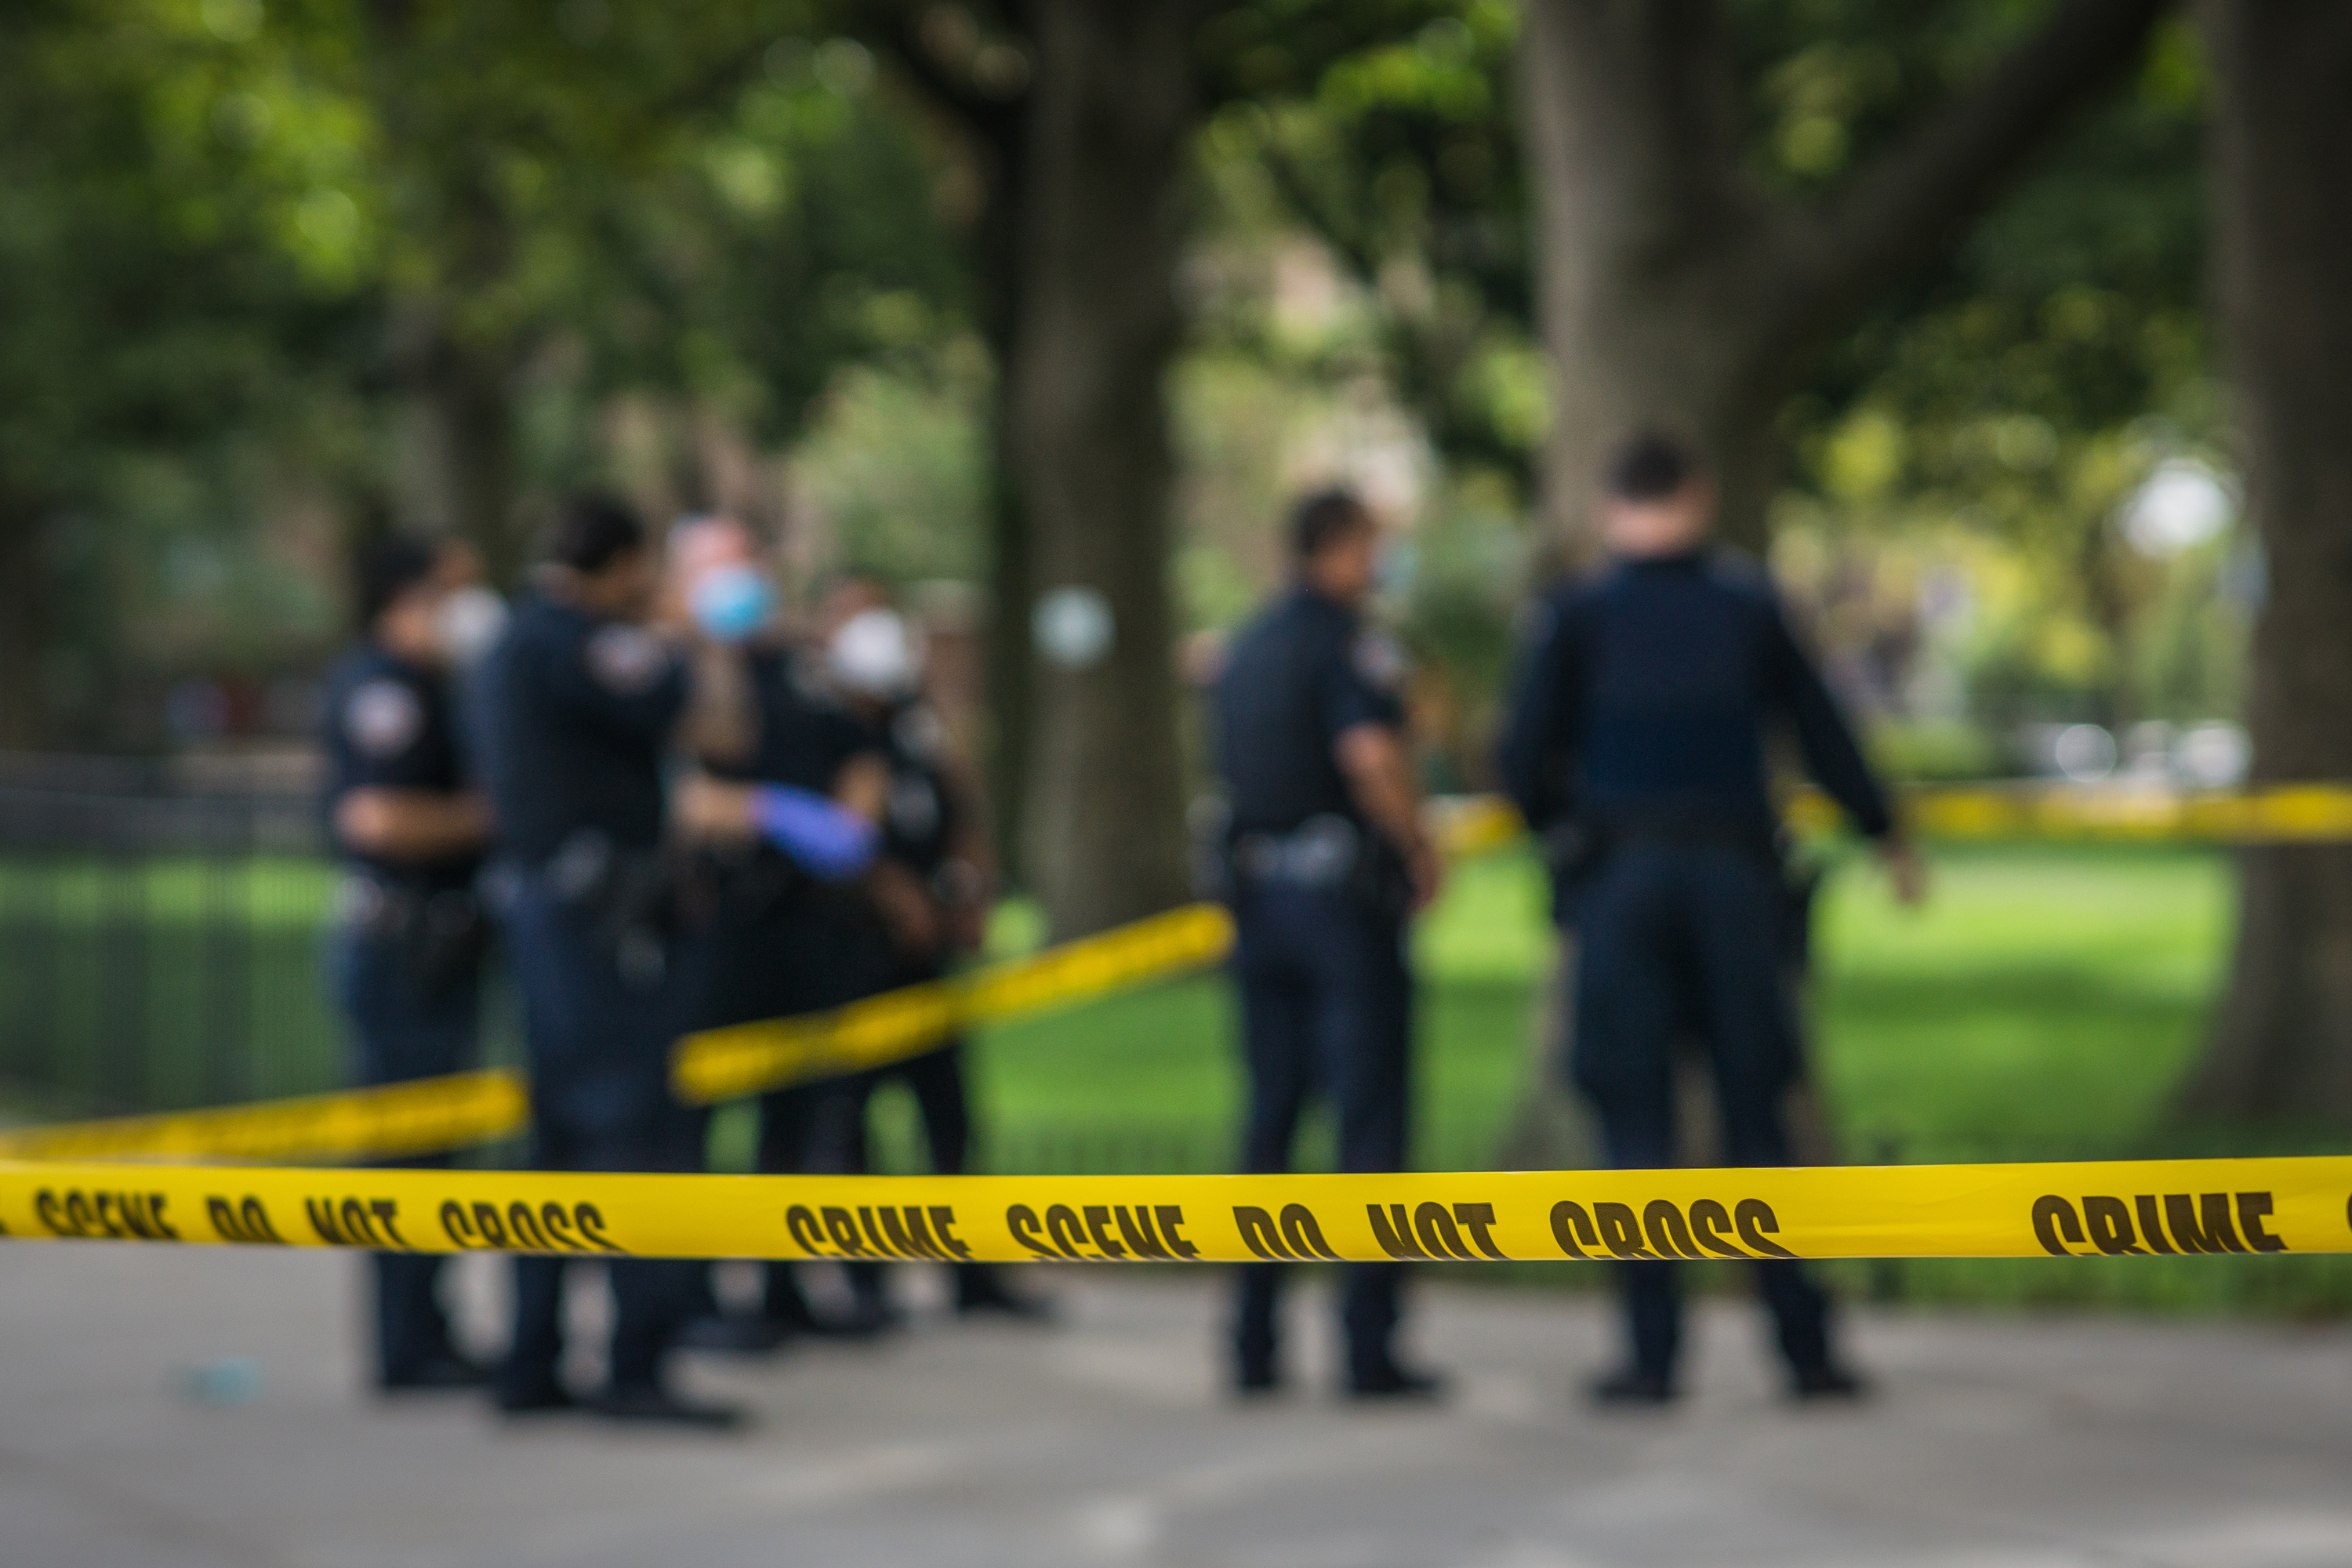 Crime scene tape surrounds police investigating a shooting in The Bronx, Sept. 13, 2020.